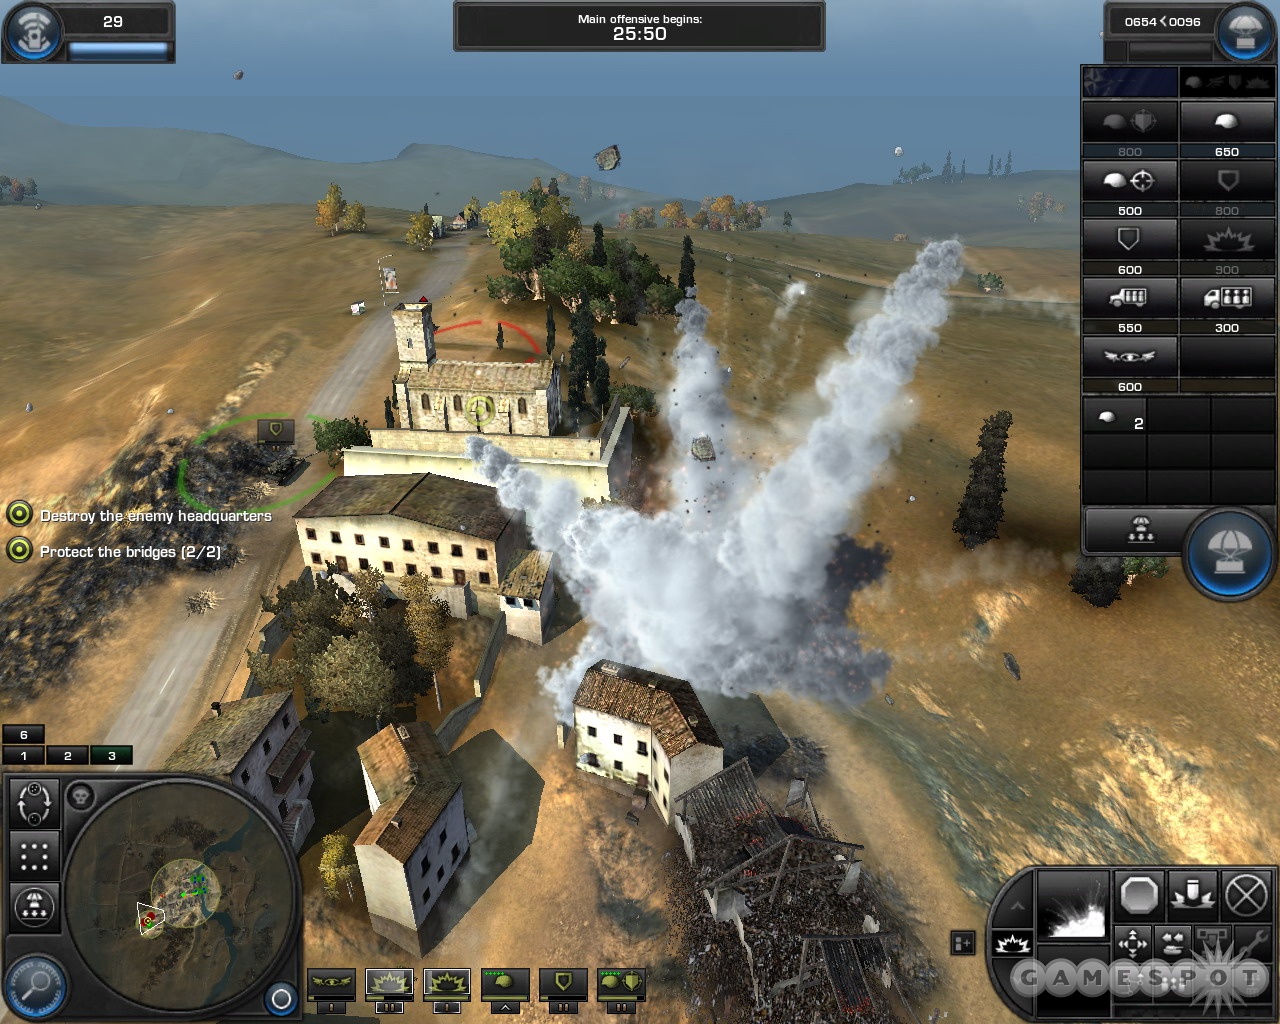 Use your artillery unit and precision artillery strikes to destroy the defenders here.